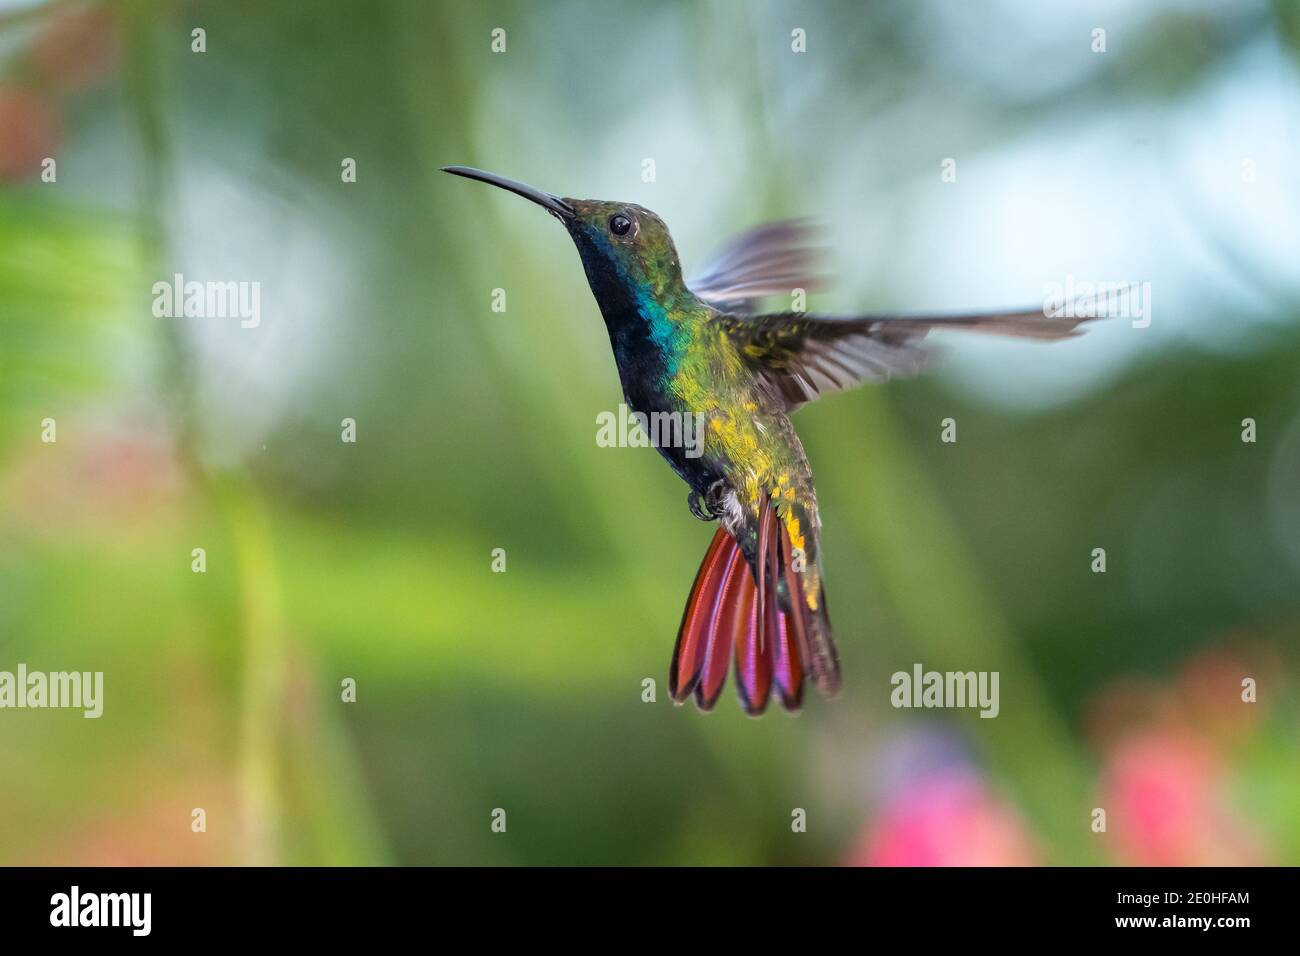 A Black-throated Mango hummingbird hovering with blurred foliage in the background. Wildlife in nature. Bird in flight. Stock Photo